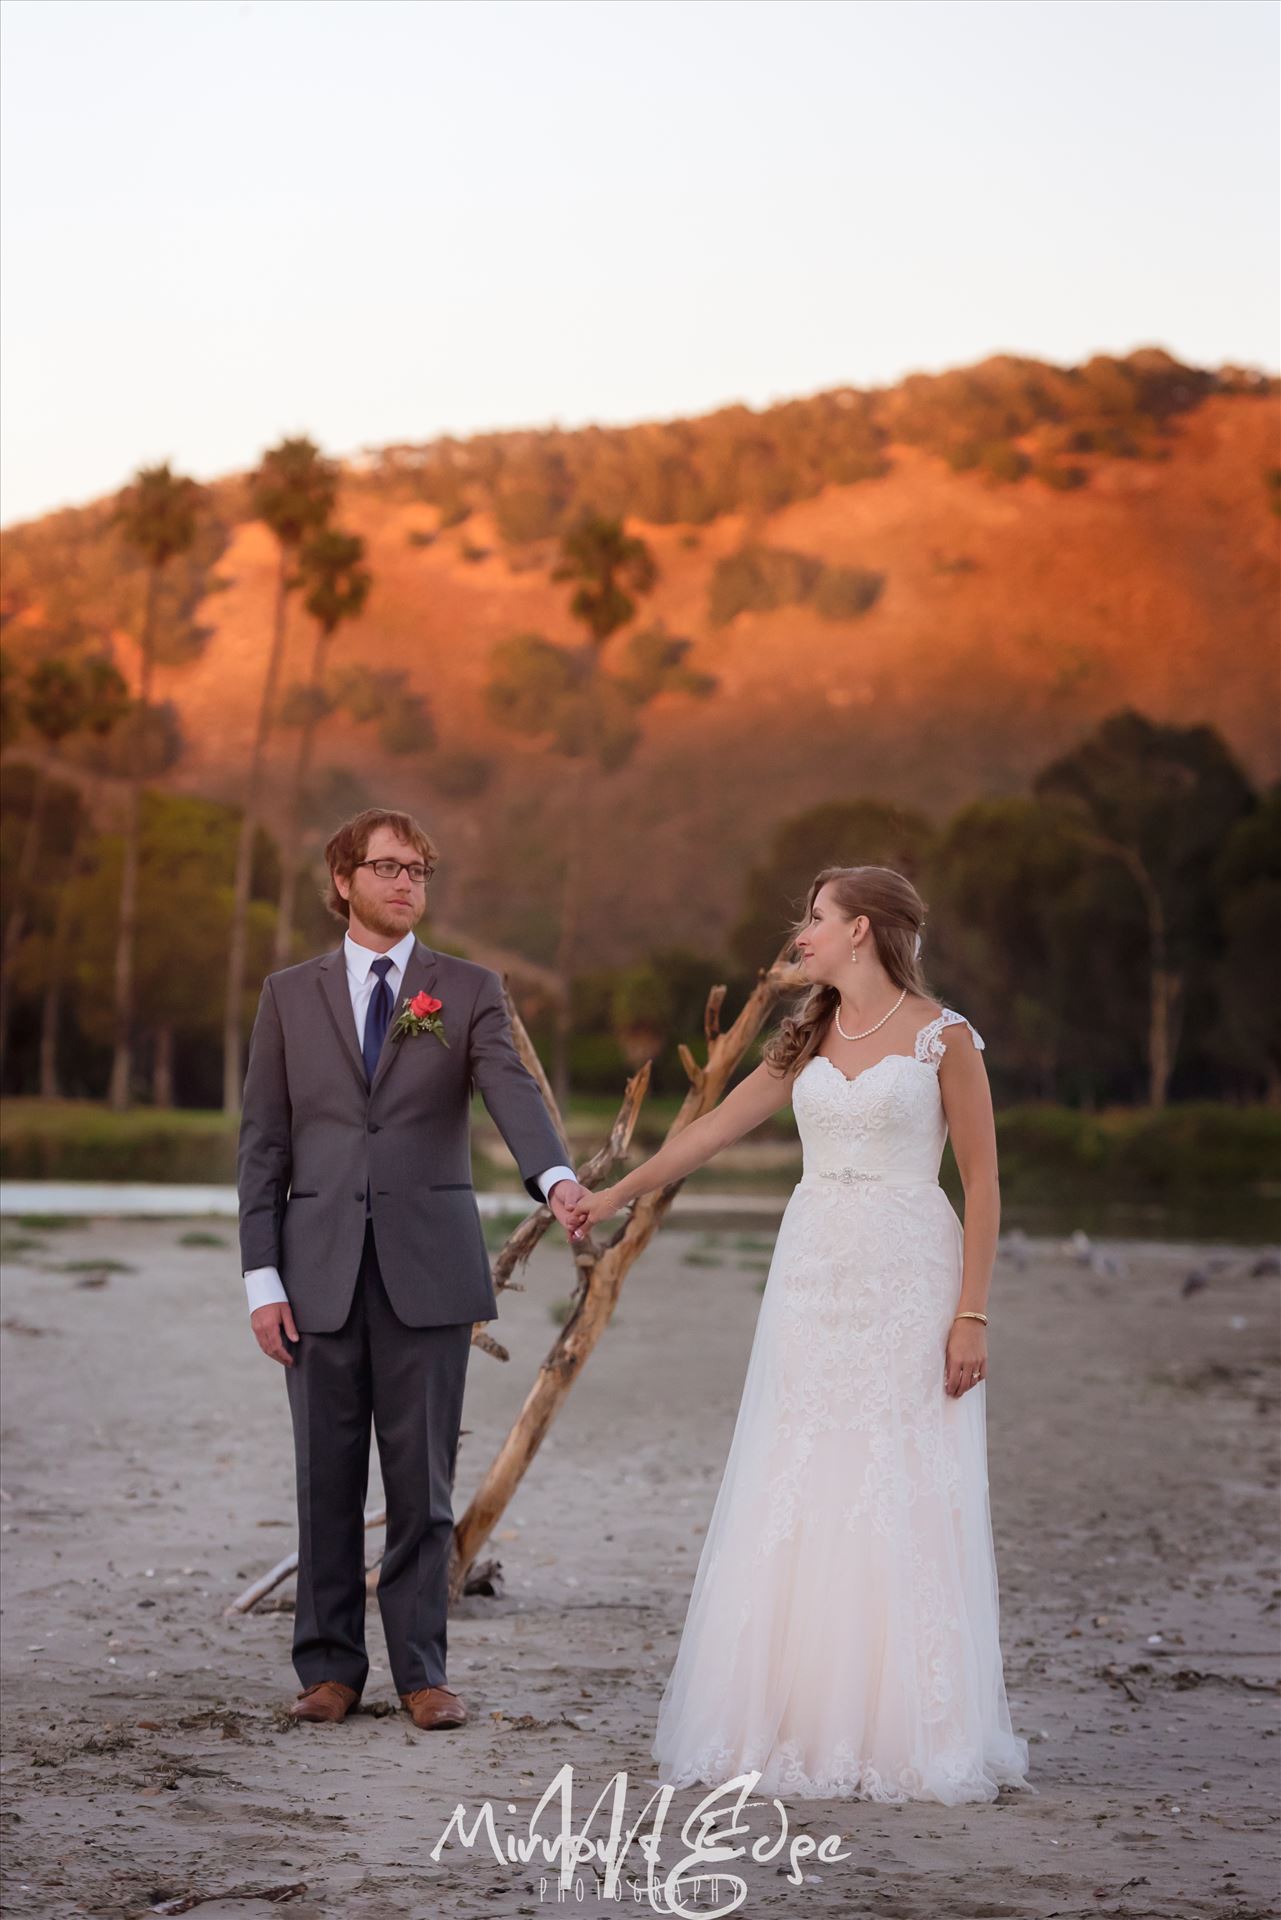 Port-7407.jpg - Romantic and Modern with a Vintage Touch - Wedding Photography at the Avila Bay Golf Resort in Avila Beach, California by Sarah Williams